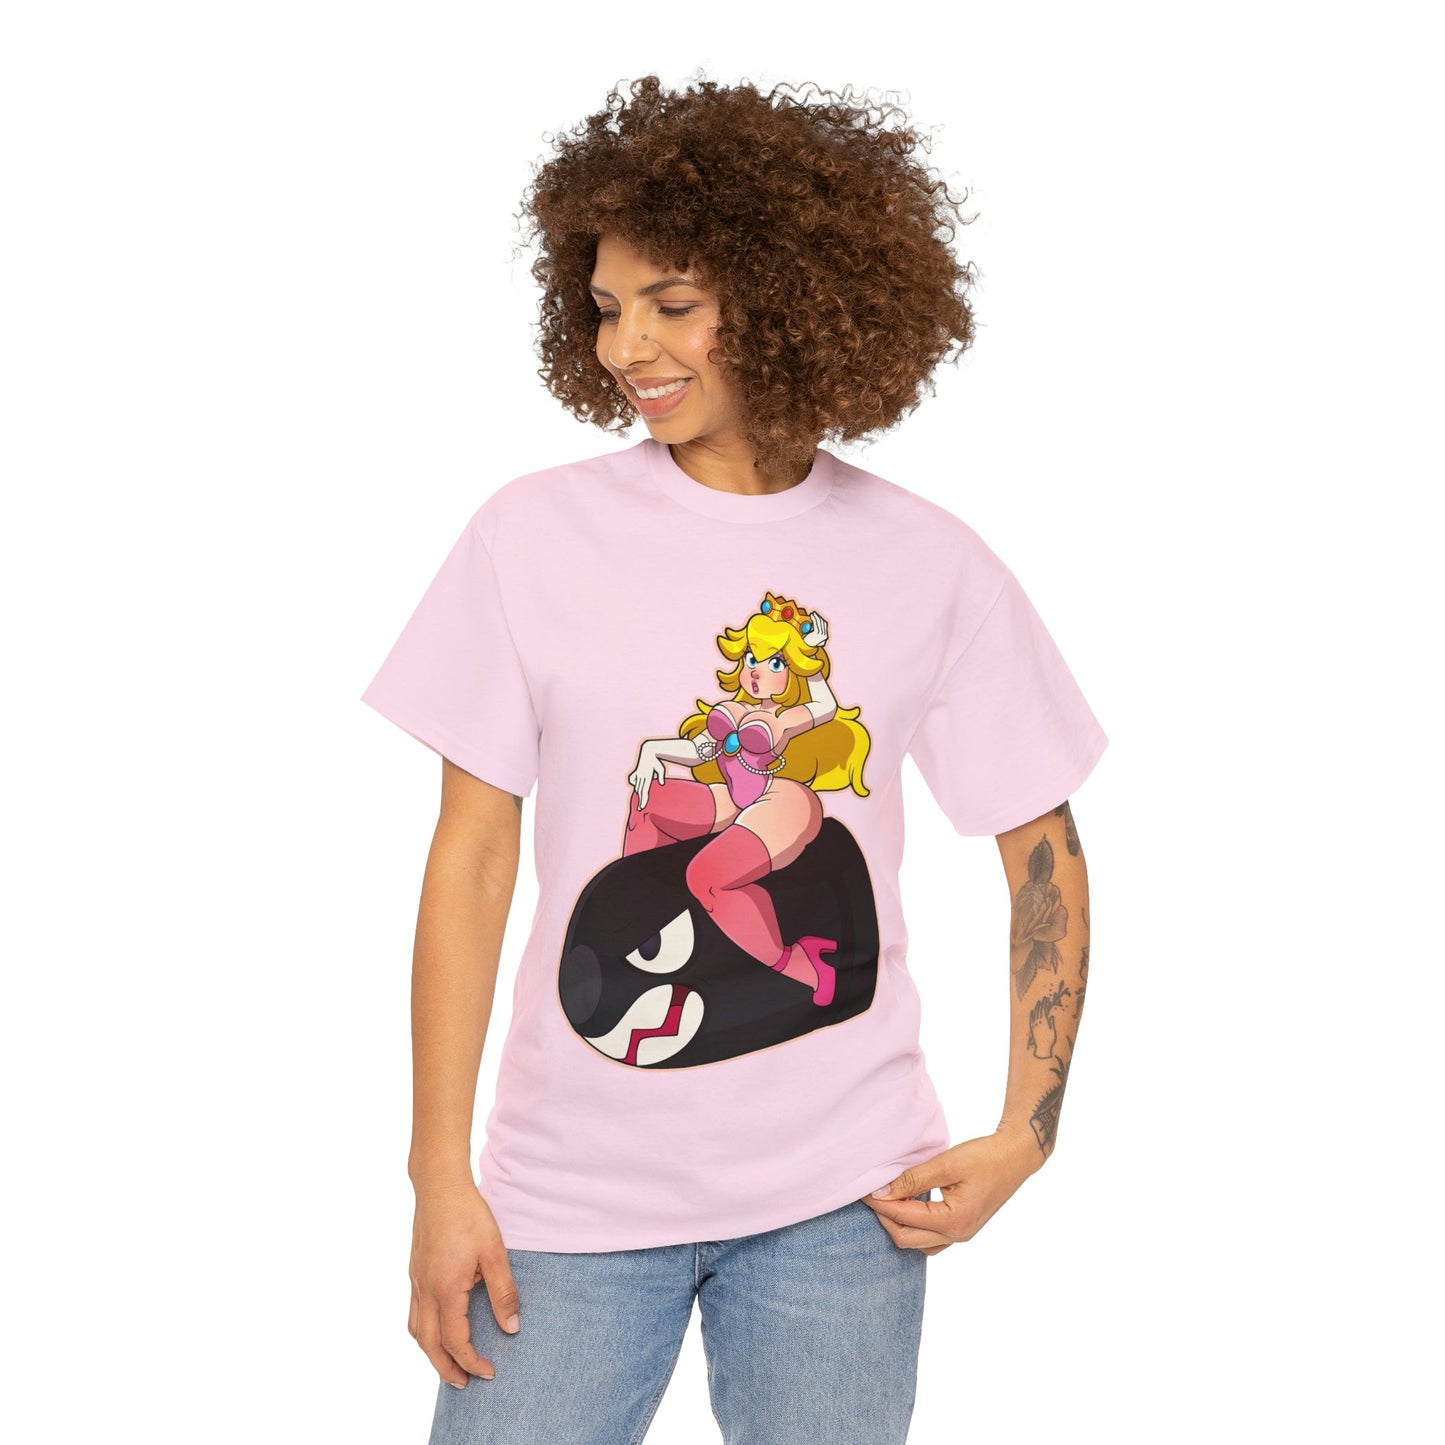 Thicc Peach Light Pink / S T-Shirt